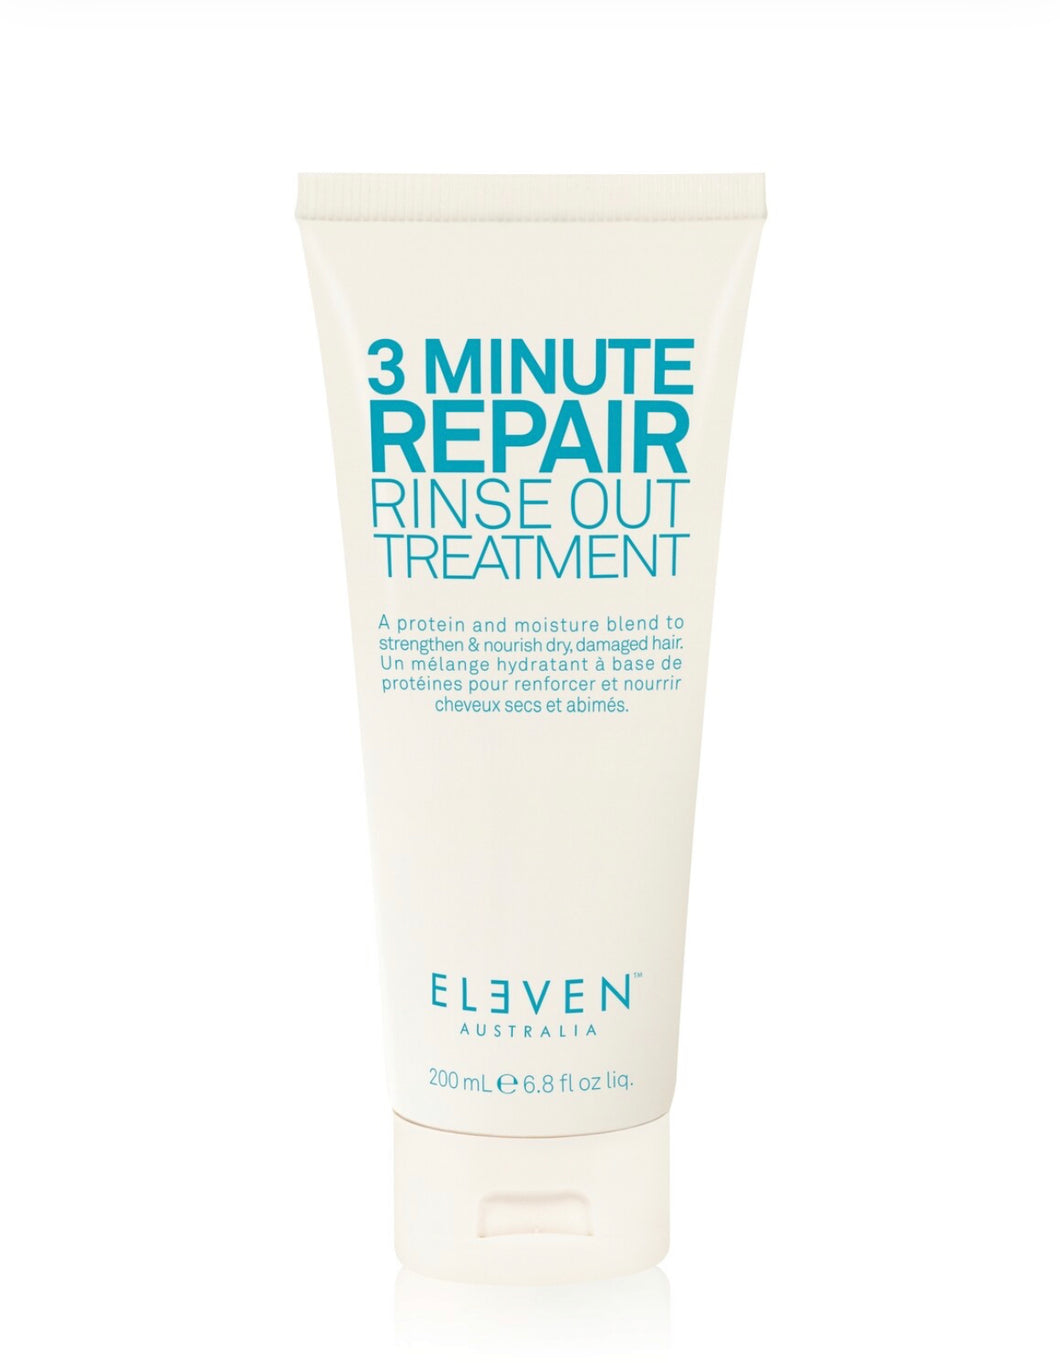 3 MINUTE REPAIR RINSE OUT TREATMENT.